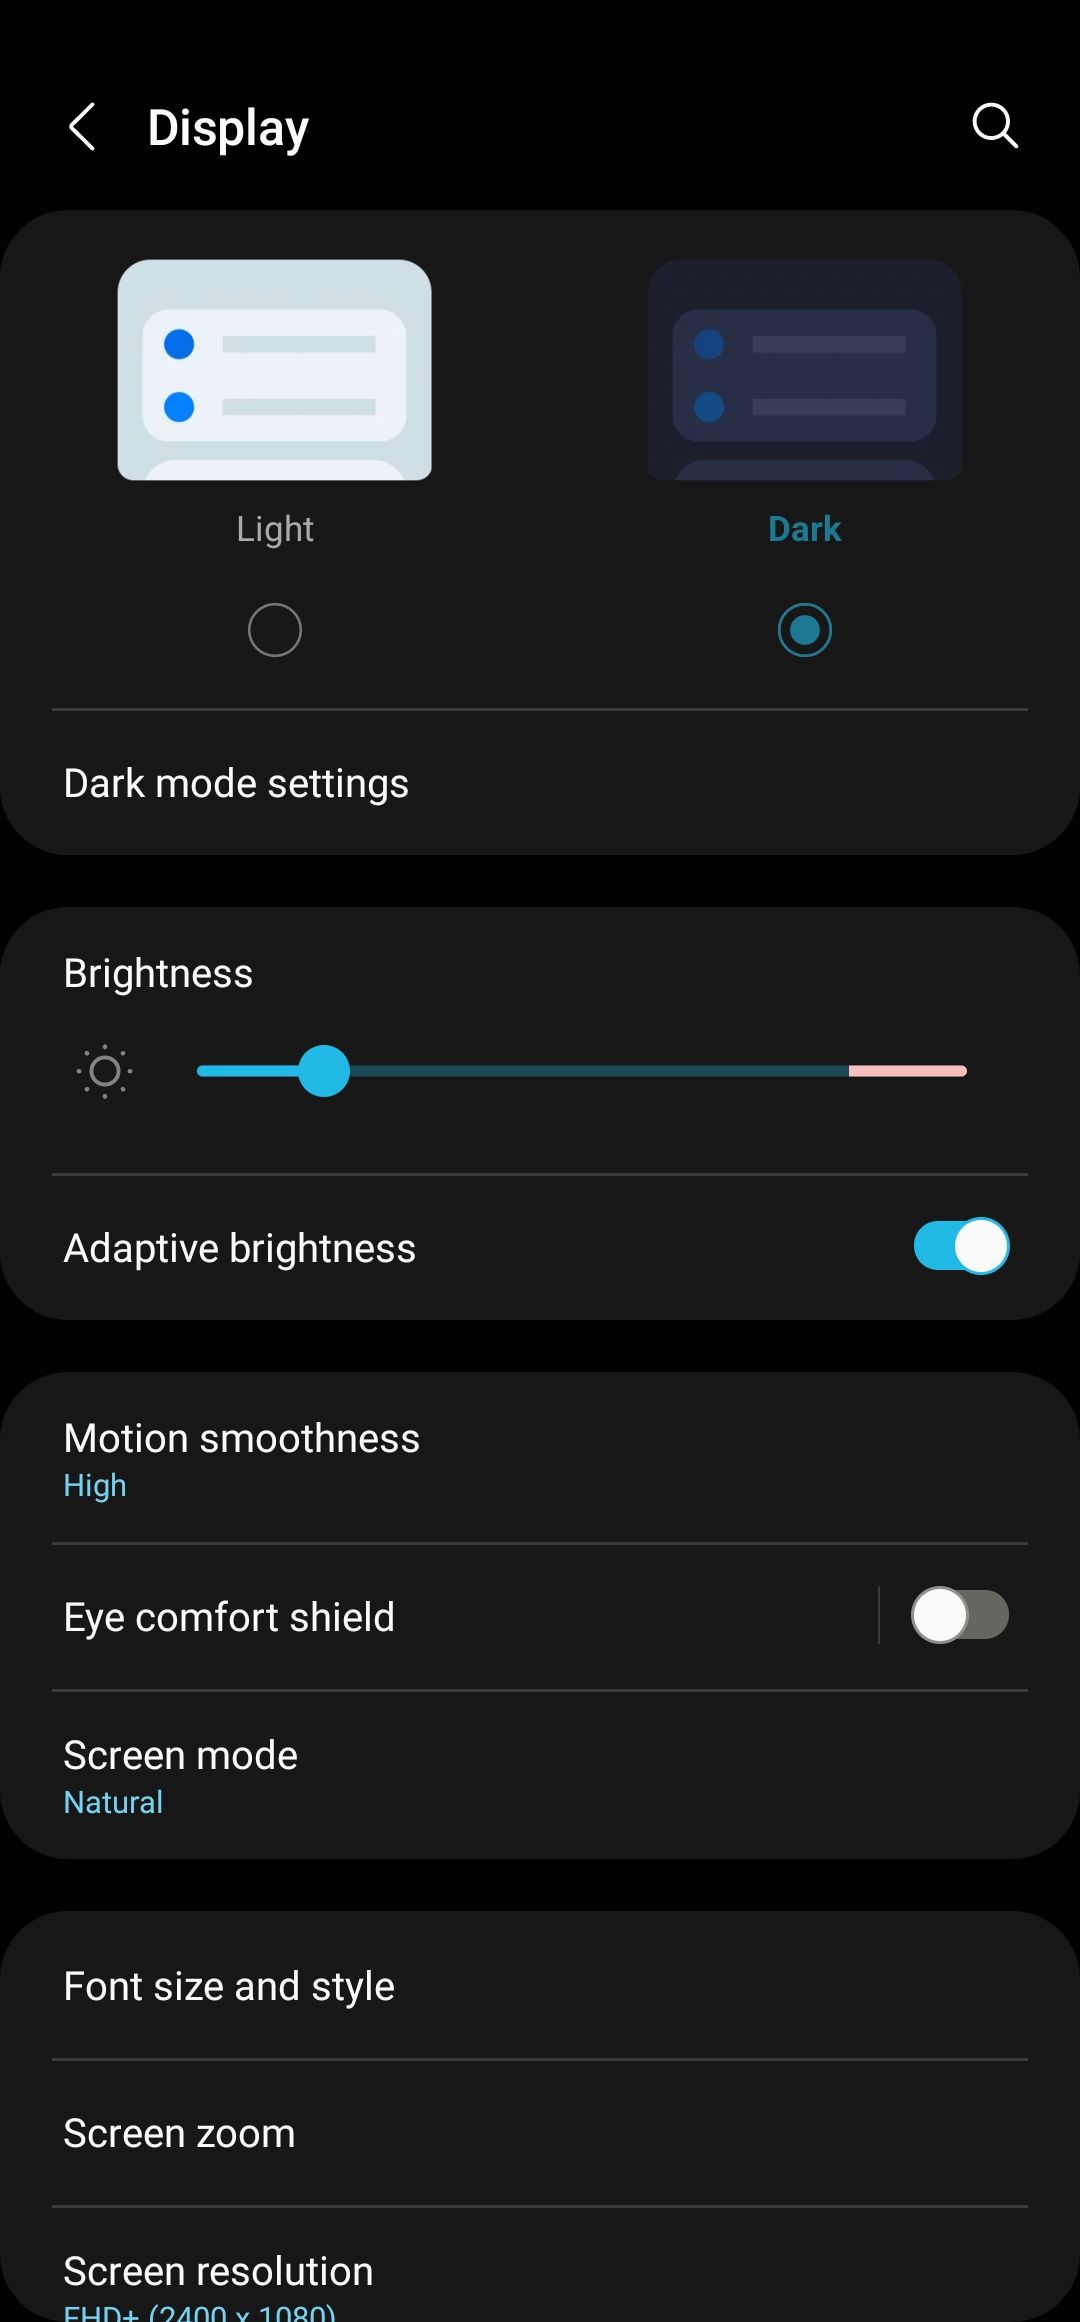 How to enable dark mode on Samsung